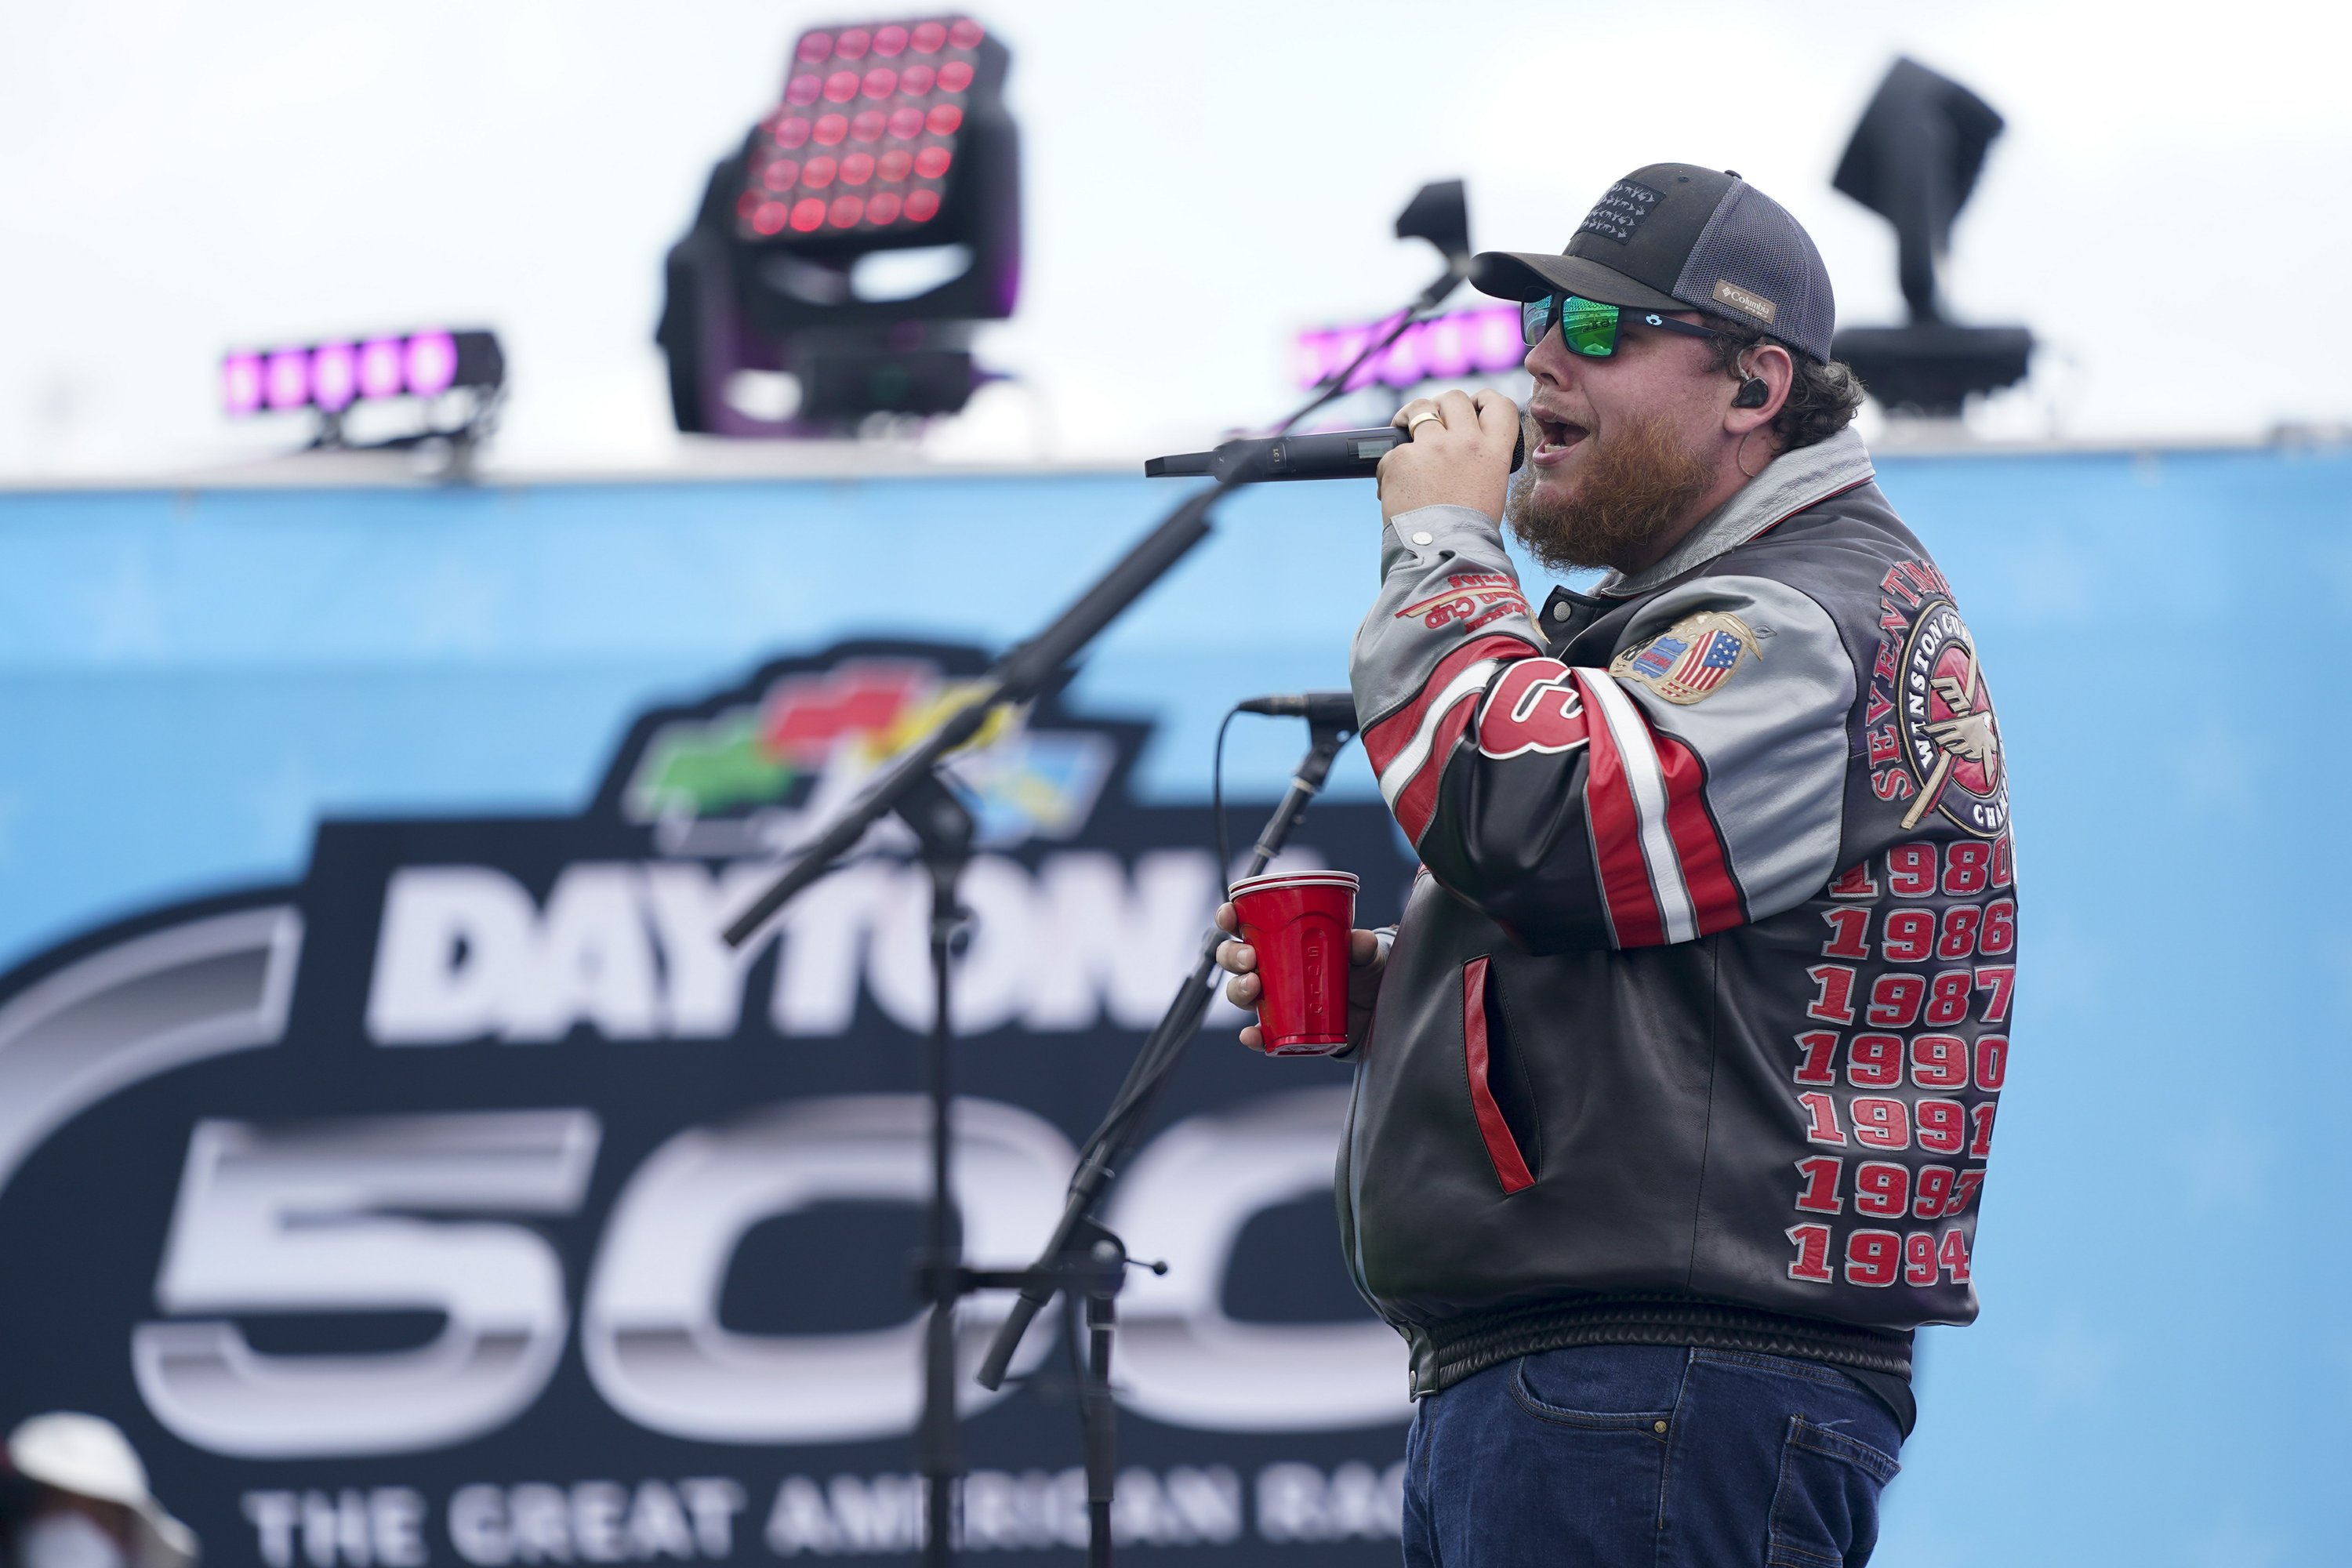 Luke Combs apologizes for the Confederate flag images